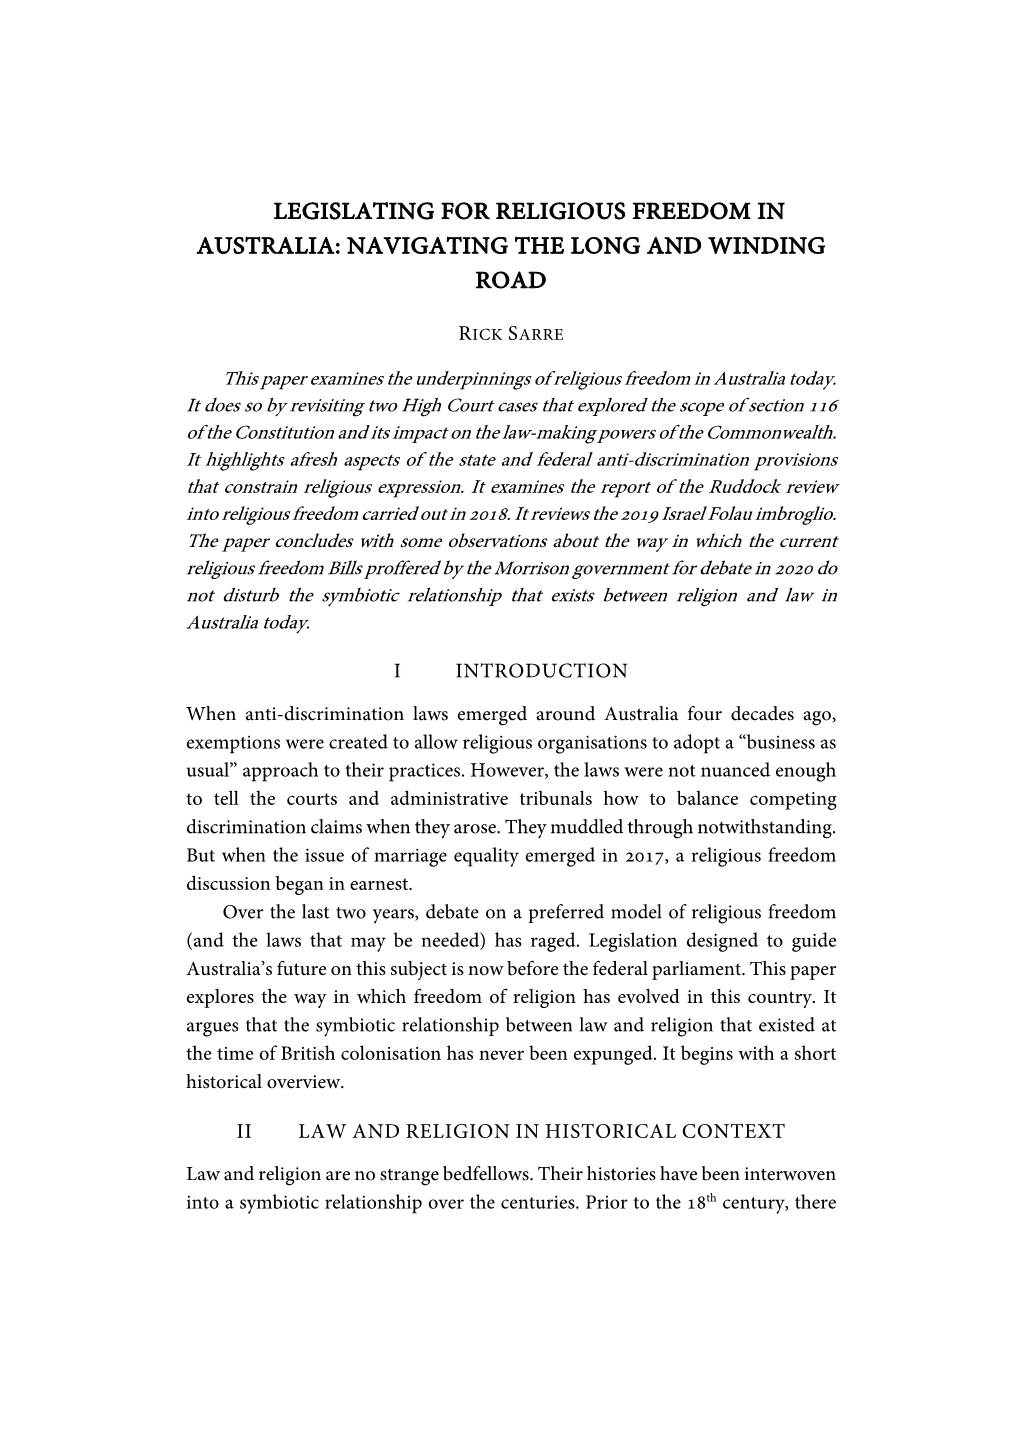 Legislating for Religious Freedom in Australia: Navigating the Long and Winding Road